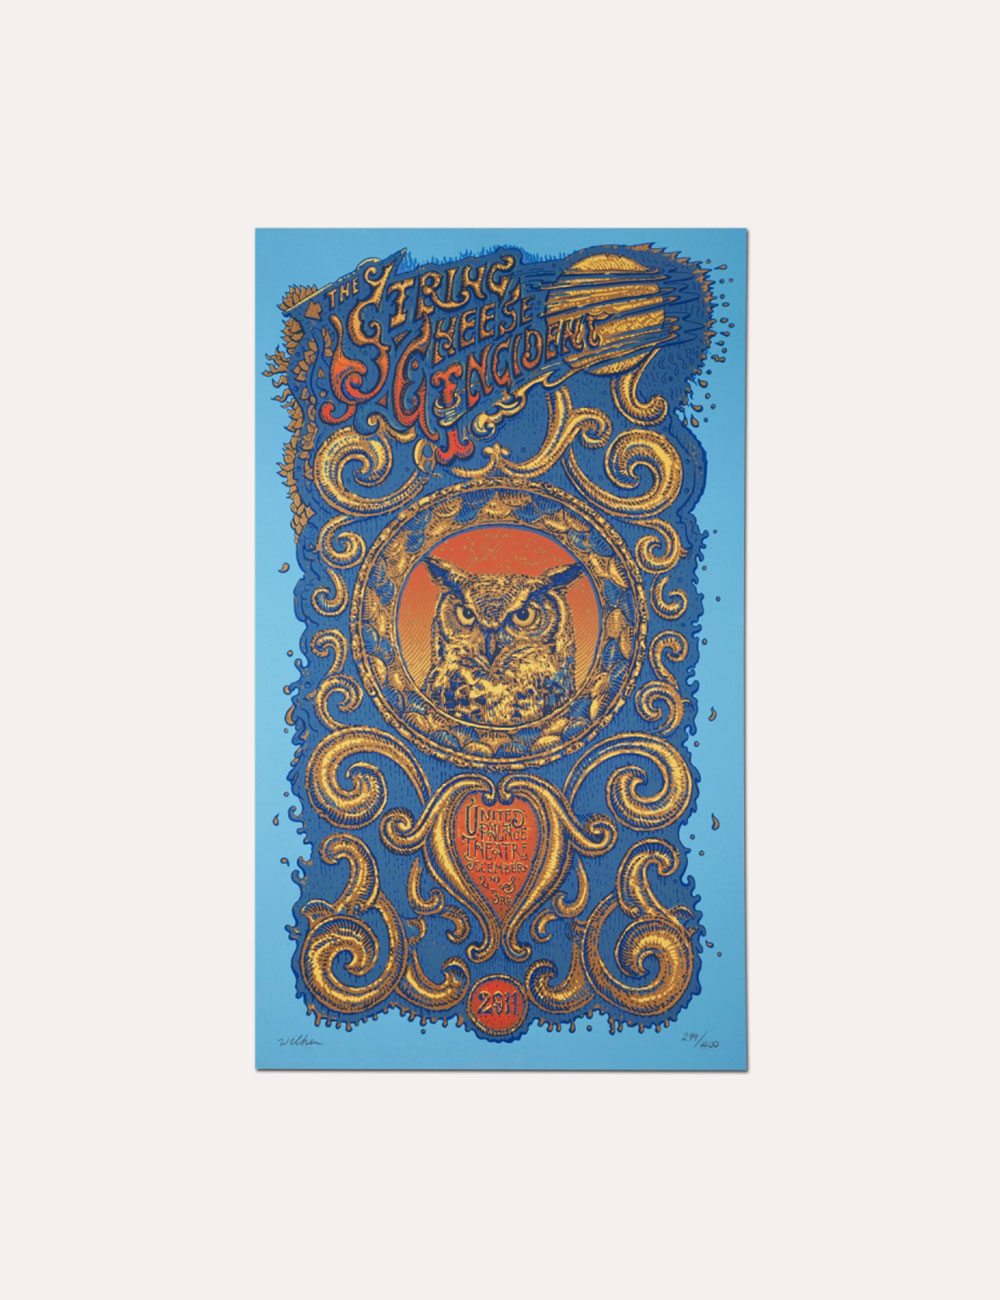 The String Cheese Incident - Merch - Poster - 2011 New York City Poster